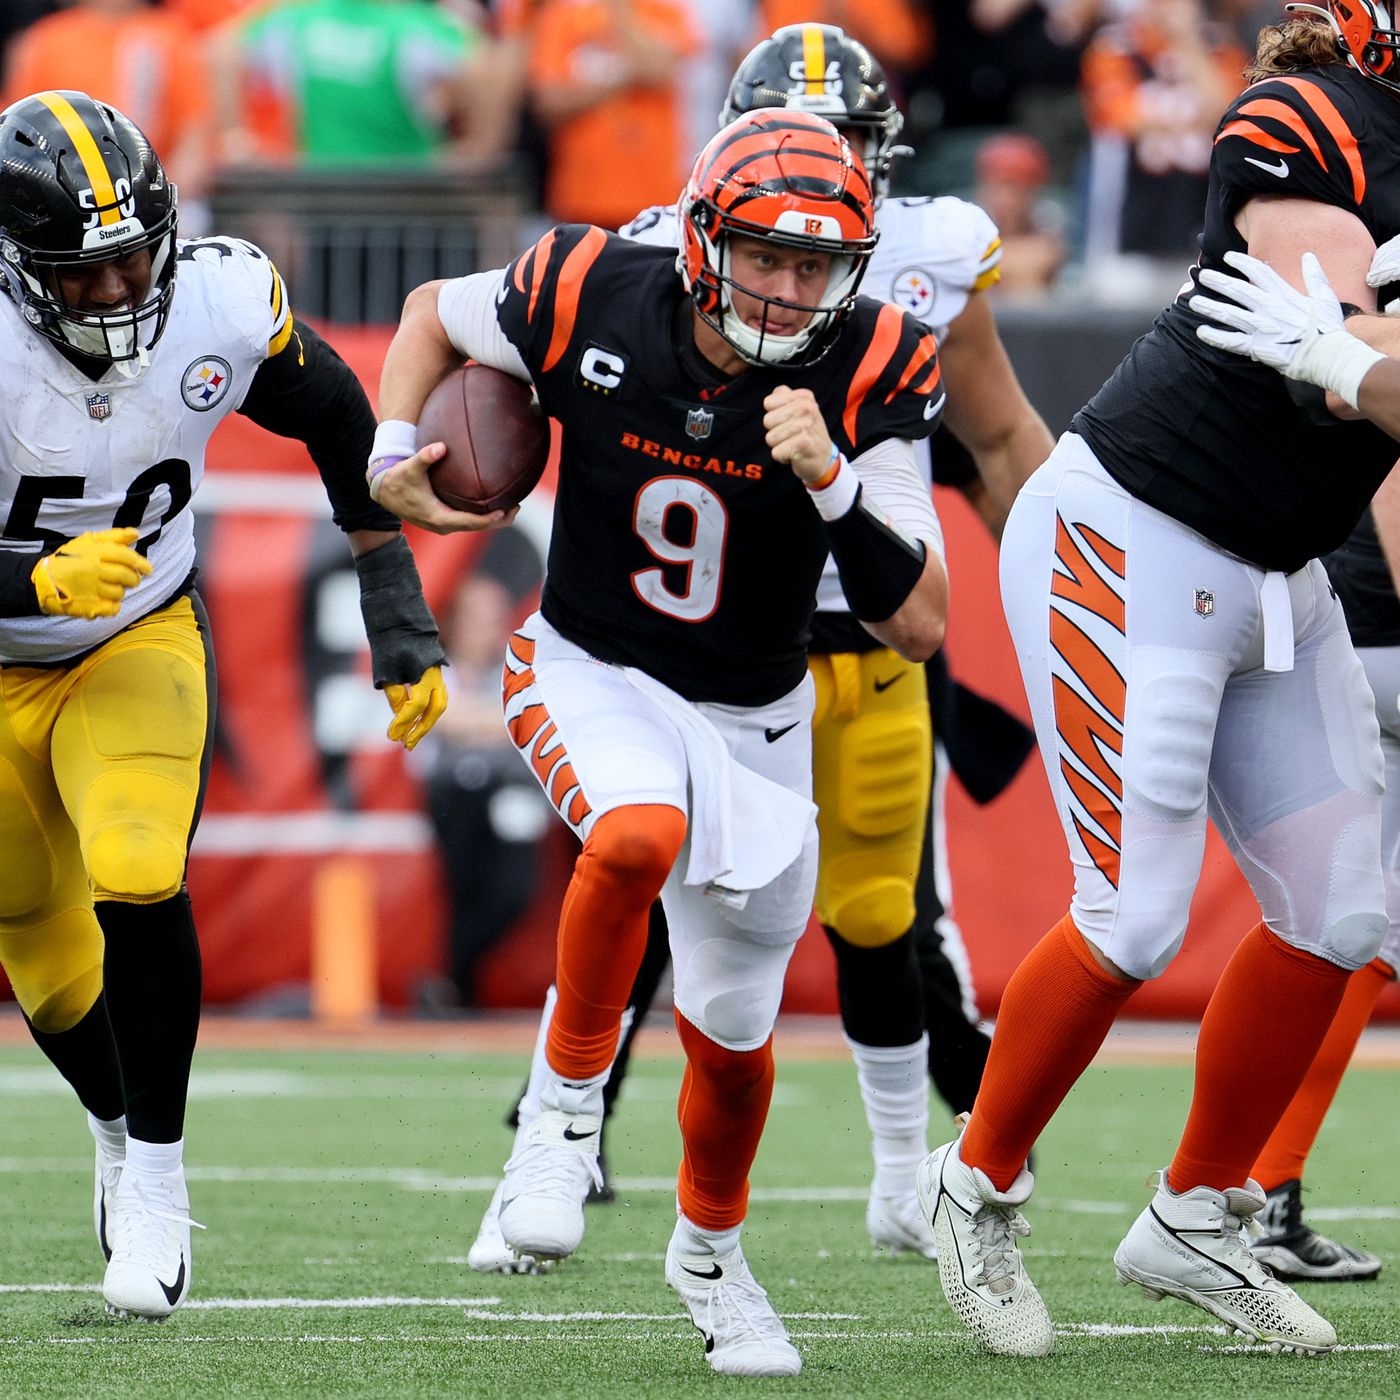 AFC North Recap, Week 15: Bengals take first place after big